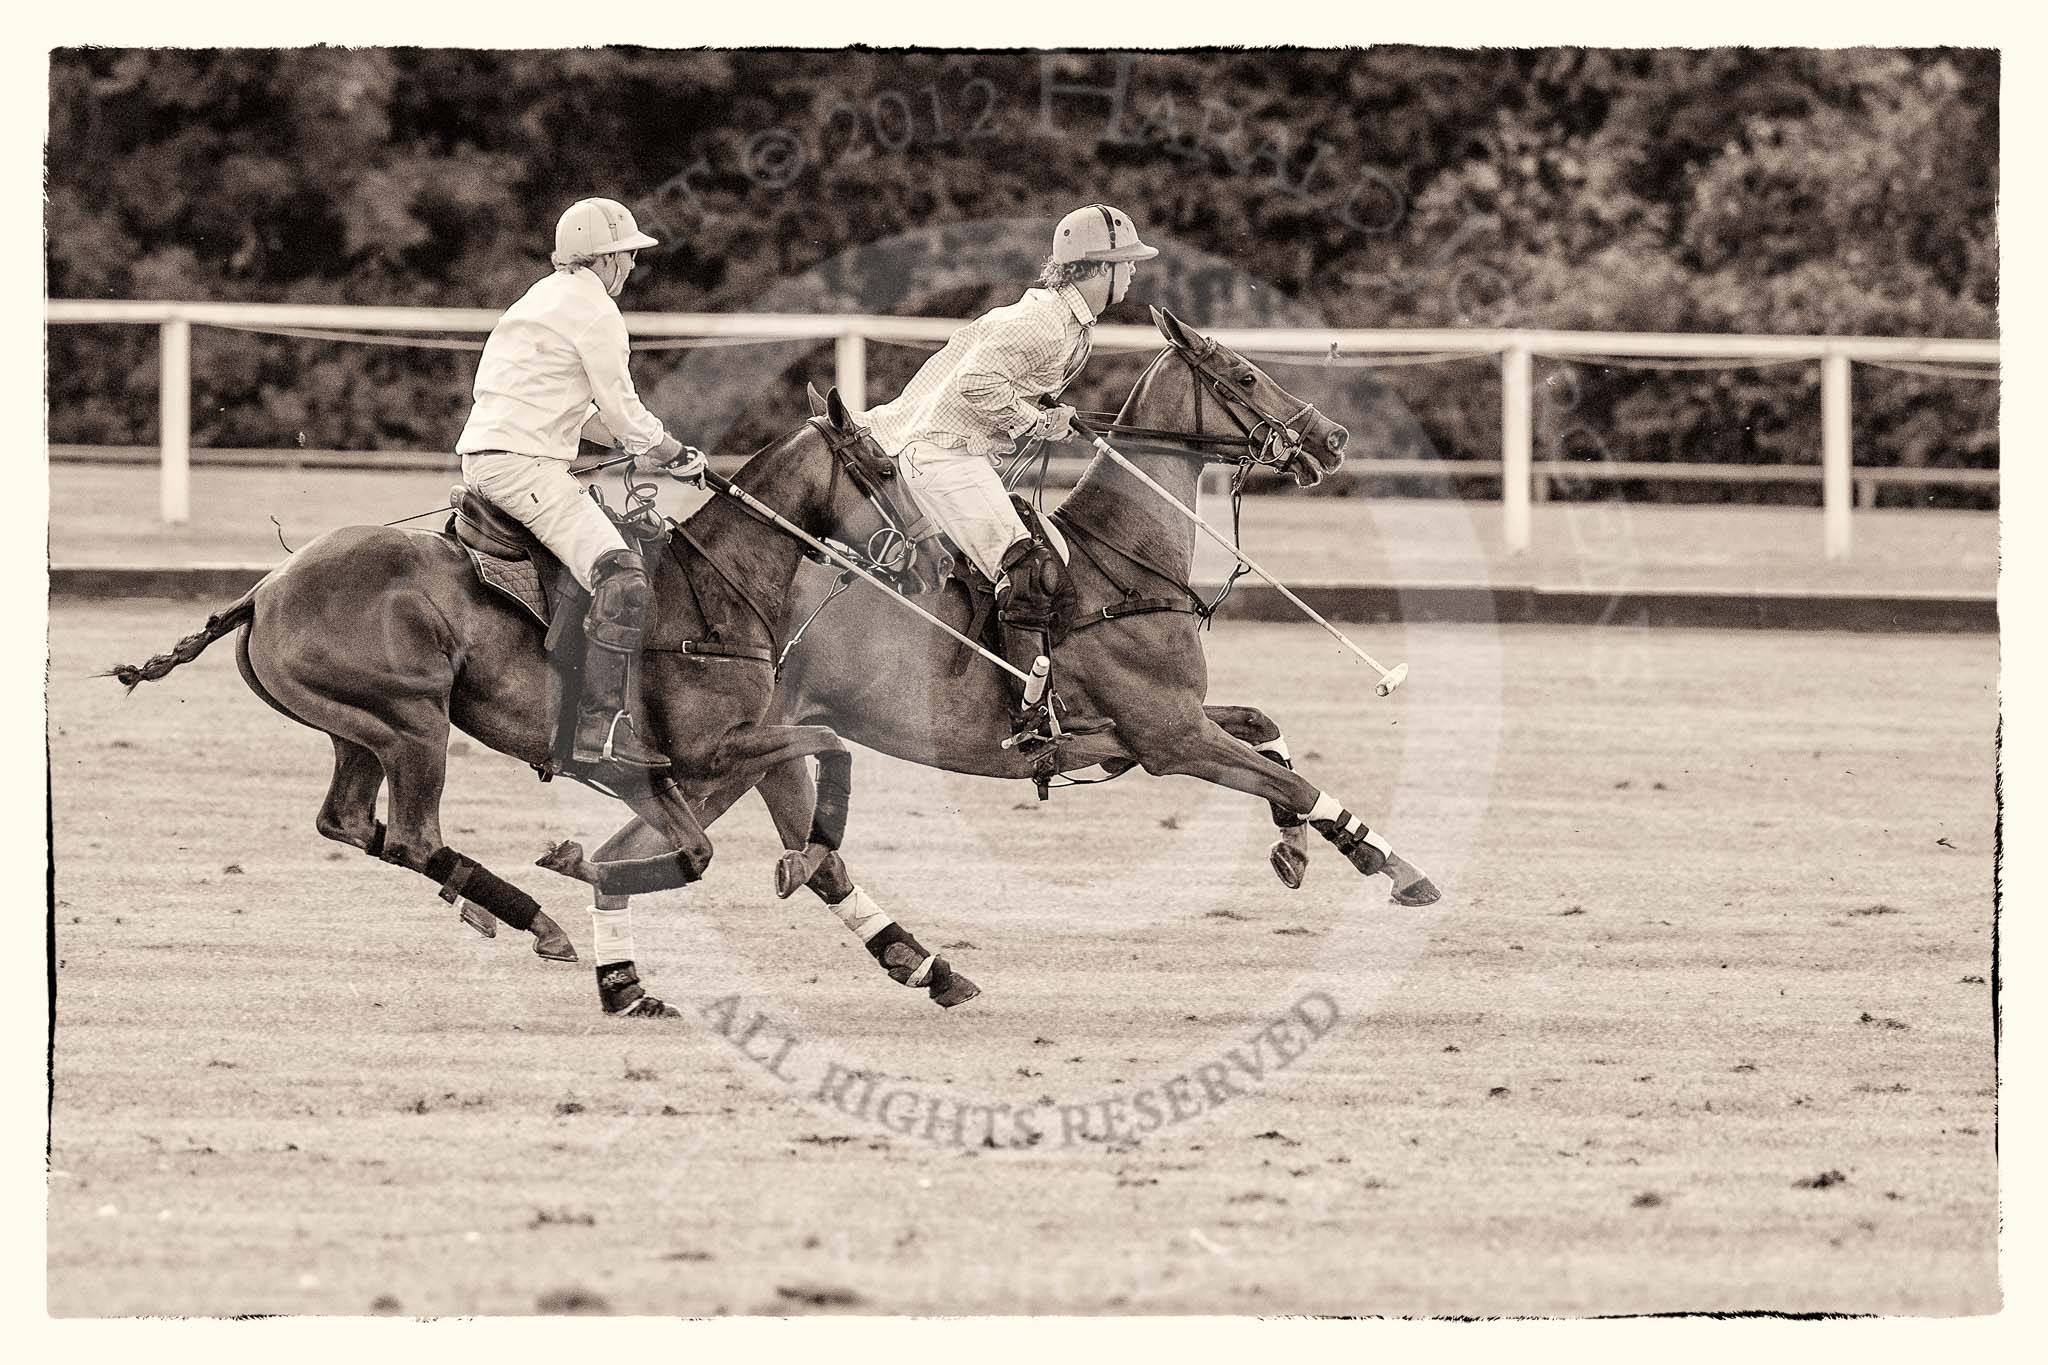 7th Heritage Polo Cup finals: Nico Talamoni & Paul Oberschneider..
Hurtwood Park Polo Club,
Ewhurst Green,
Surrey,
United Kingdom,
on 05 August 2012 at 16:05, image #206